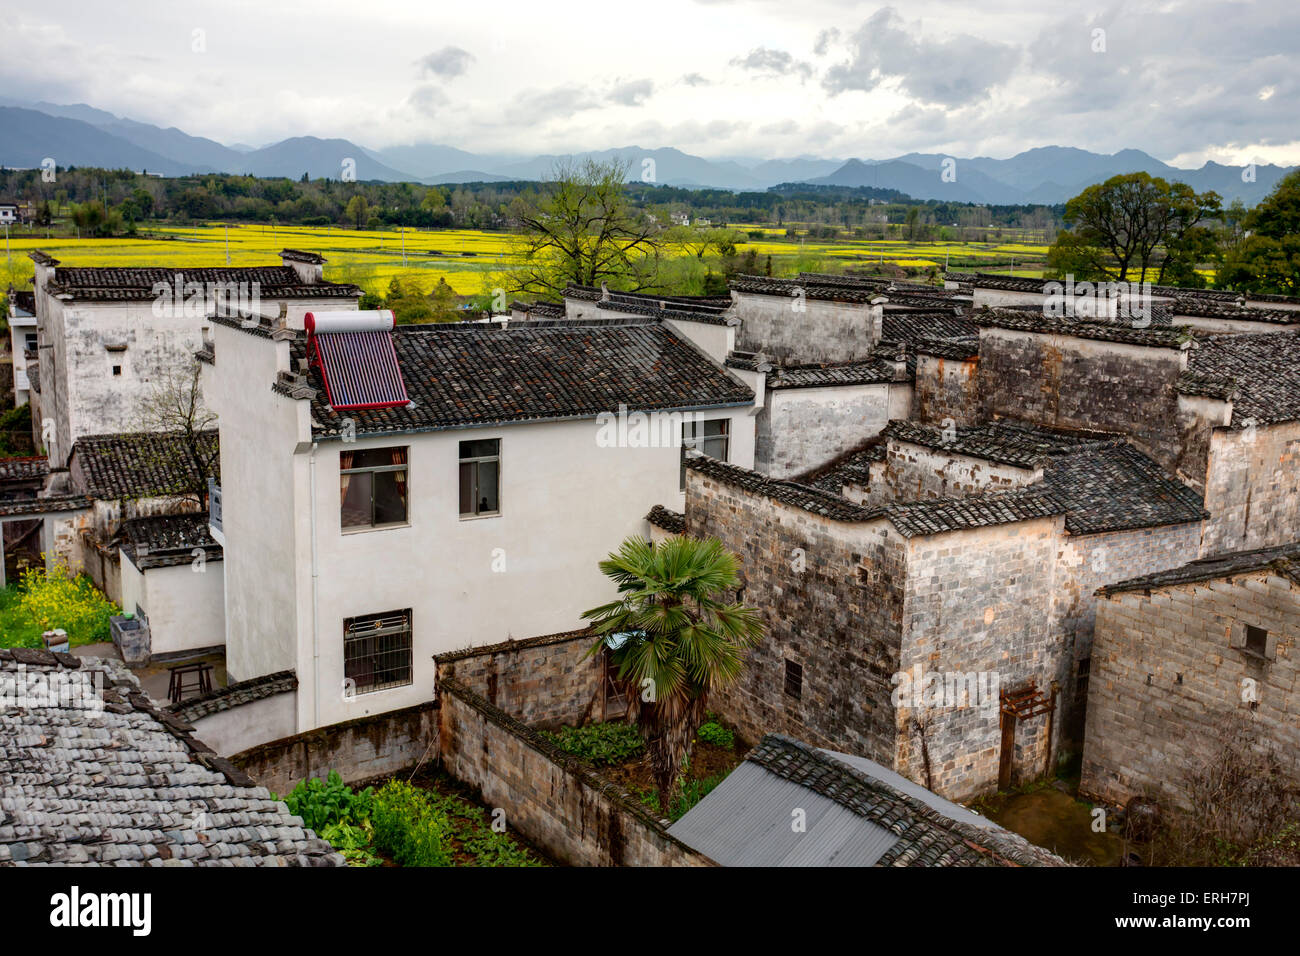 Rural landscape in Anhui province, China. Stock Photo